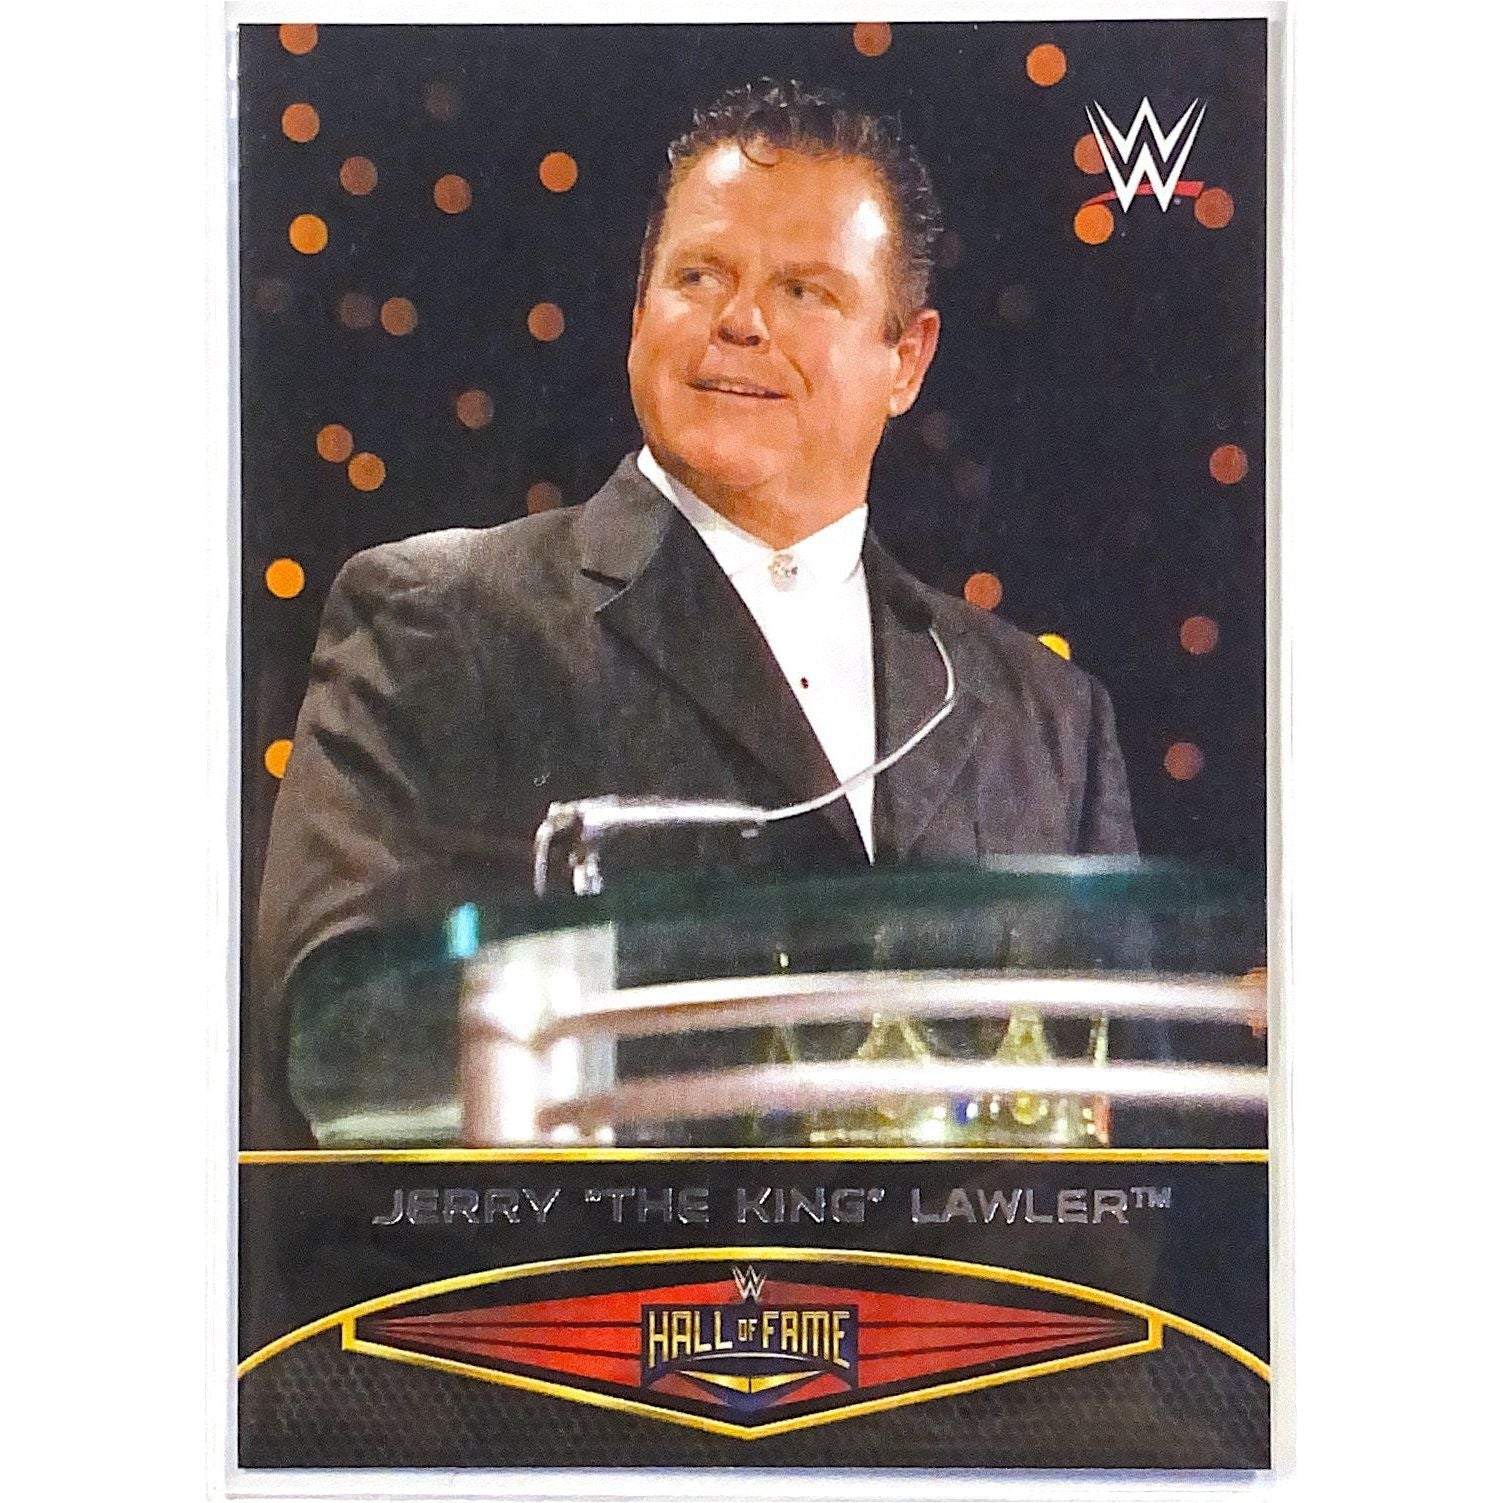  2015 Topps WWE Road to Wrestlemania Jerry “The King” Lawler Hall of Fame #20 of 30  Local Legends Cards & Collectibles